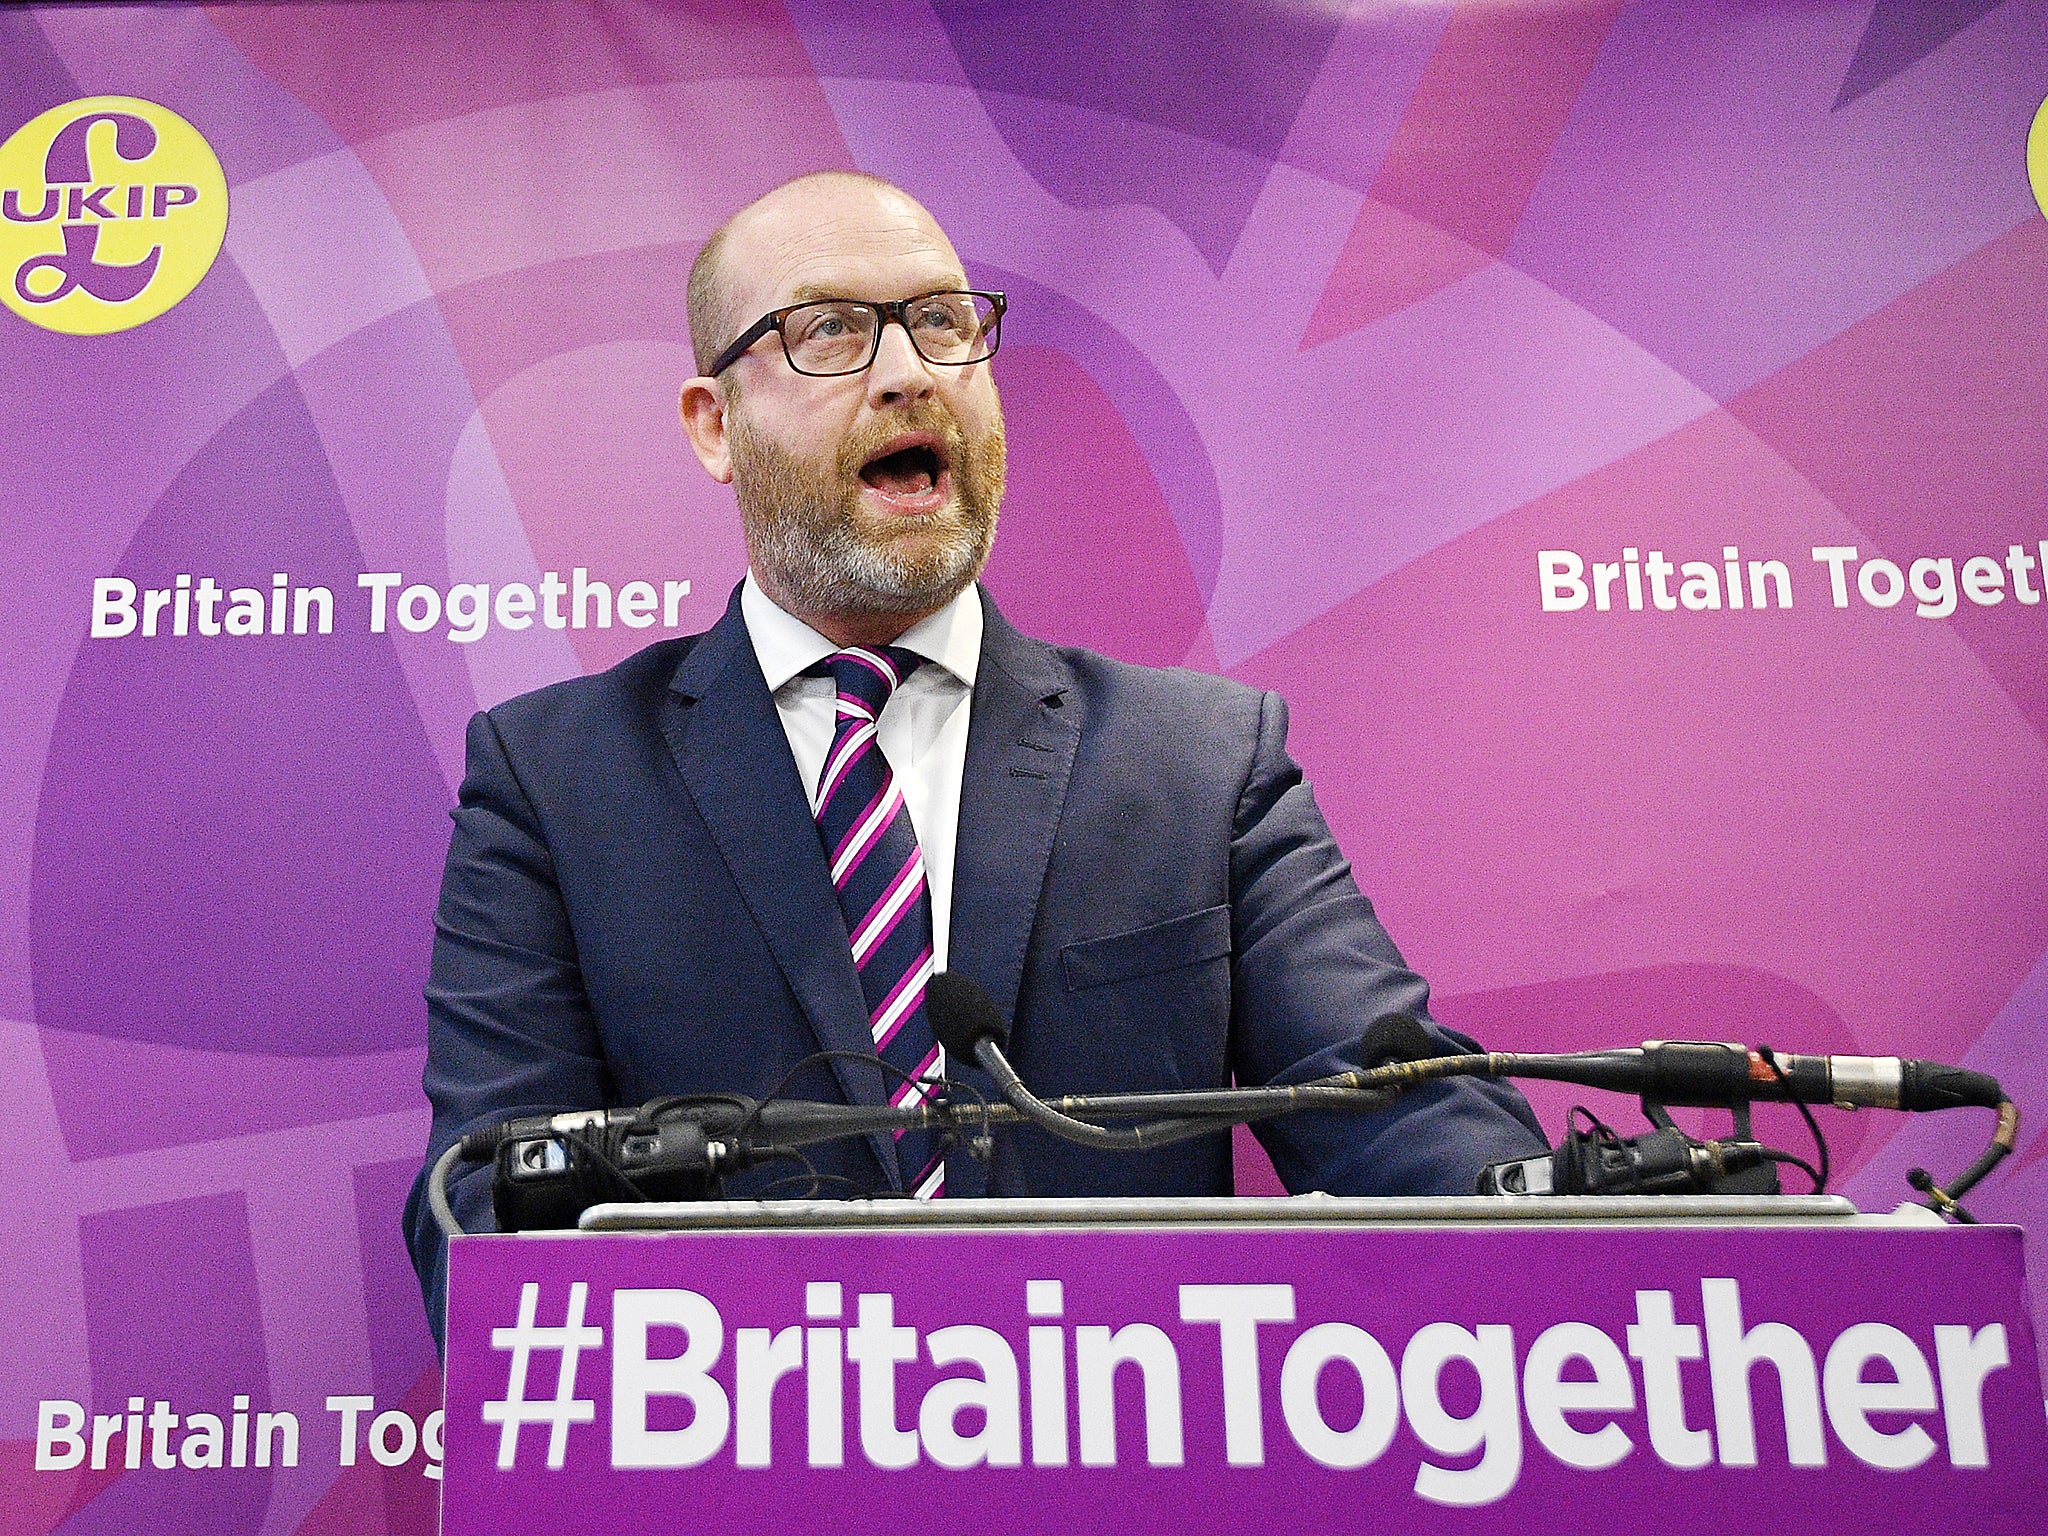 Ukip leader Paul Nuttall launched his party's manifesto with a vow to cut net migration to zero